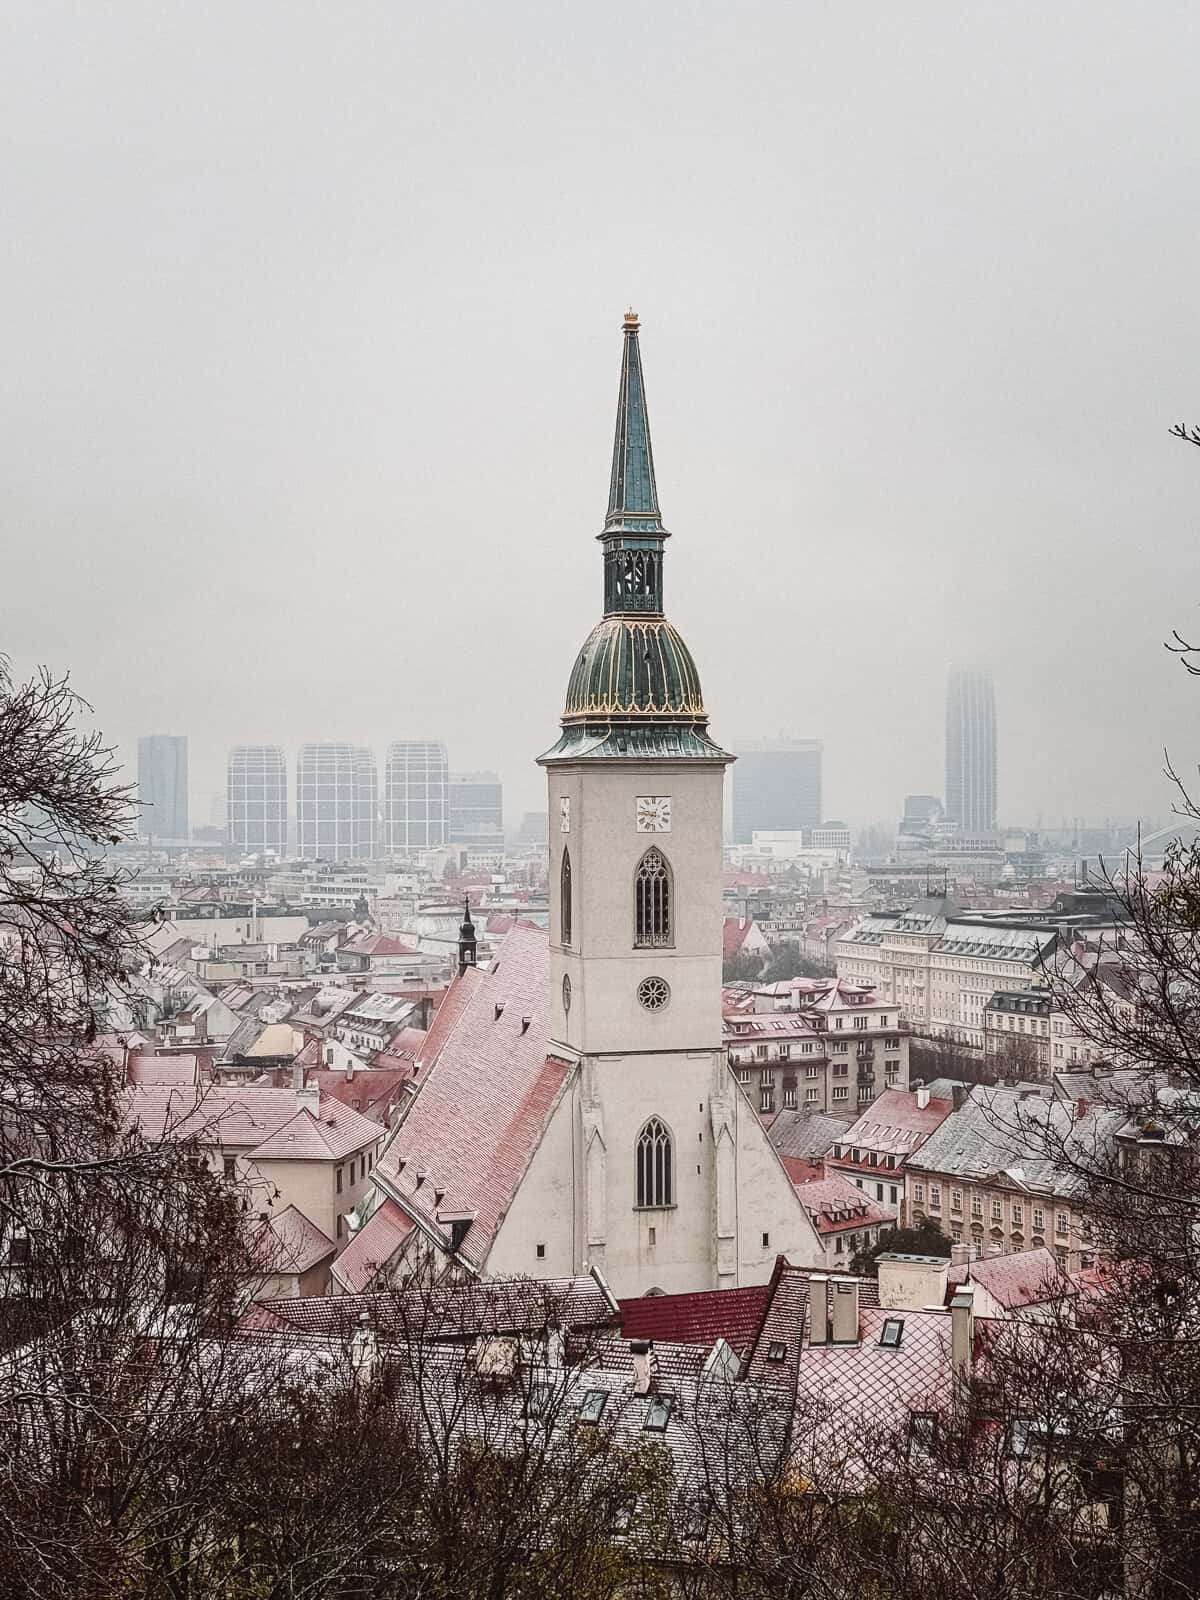 A view of St. Martin's Cathedral spire rising above the surrounding historical architecture in Bratislava, contrasting modern buildings in the hazy background, showcasing the city's blend of old and new.